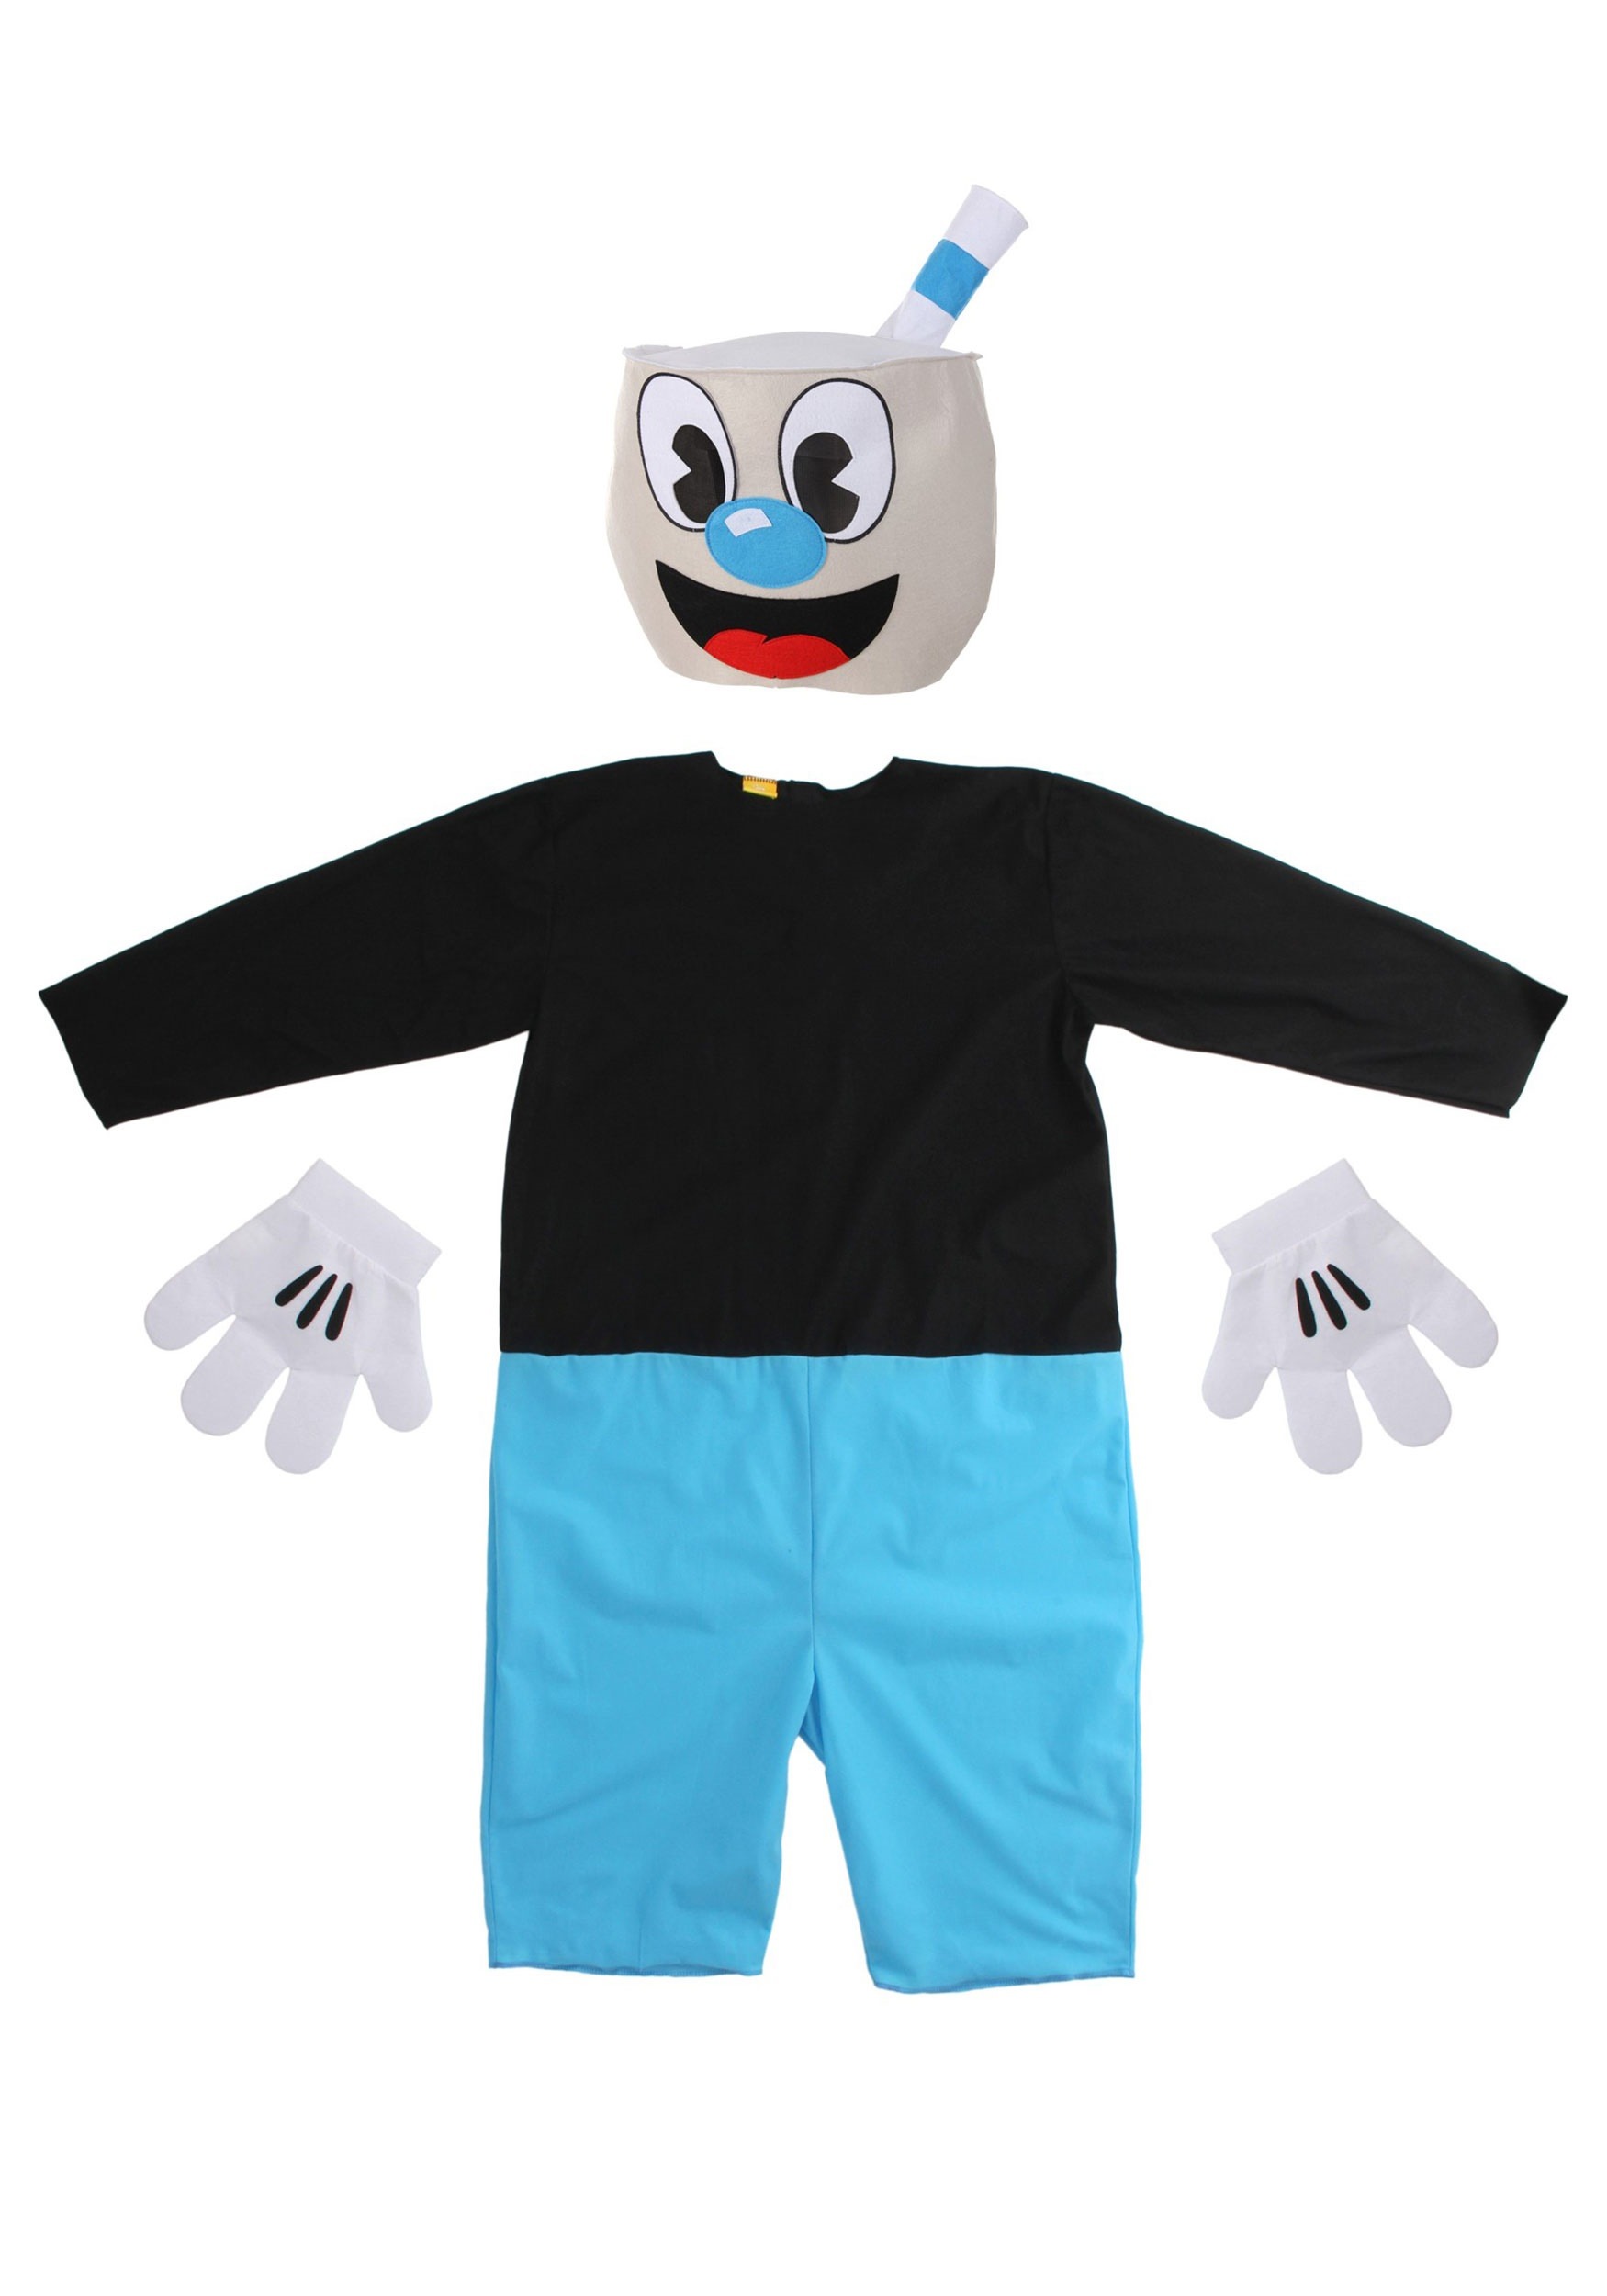 Cuphead King Dice Costume Vacuform Mask for Adults and Kids